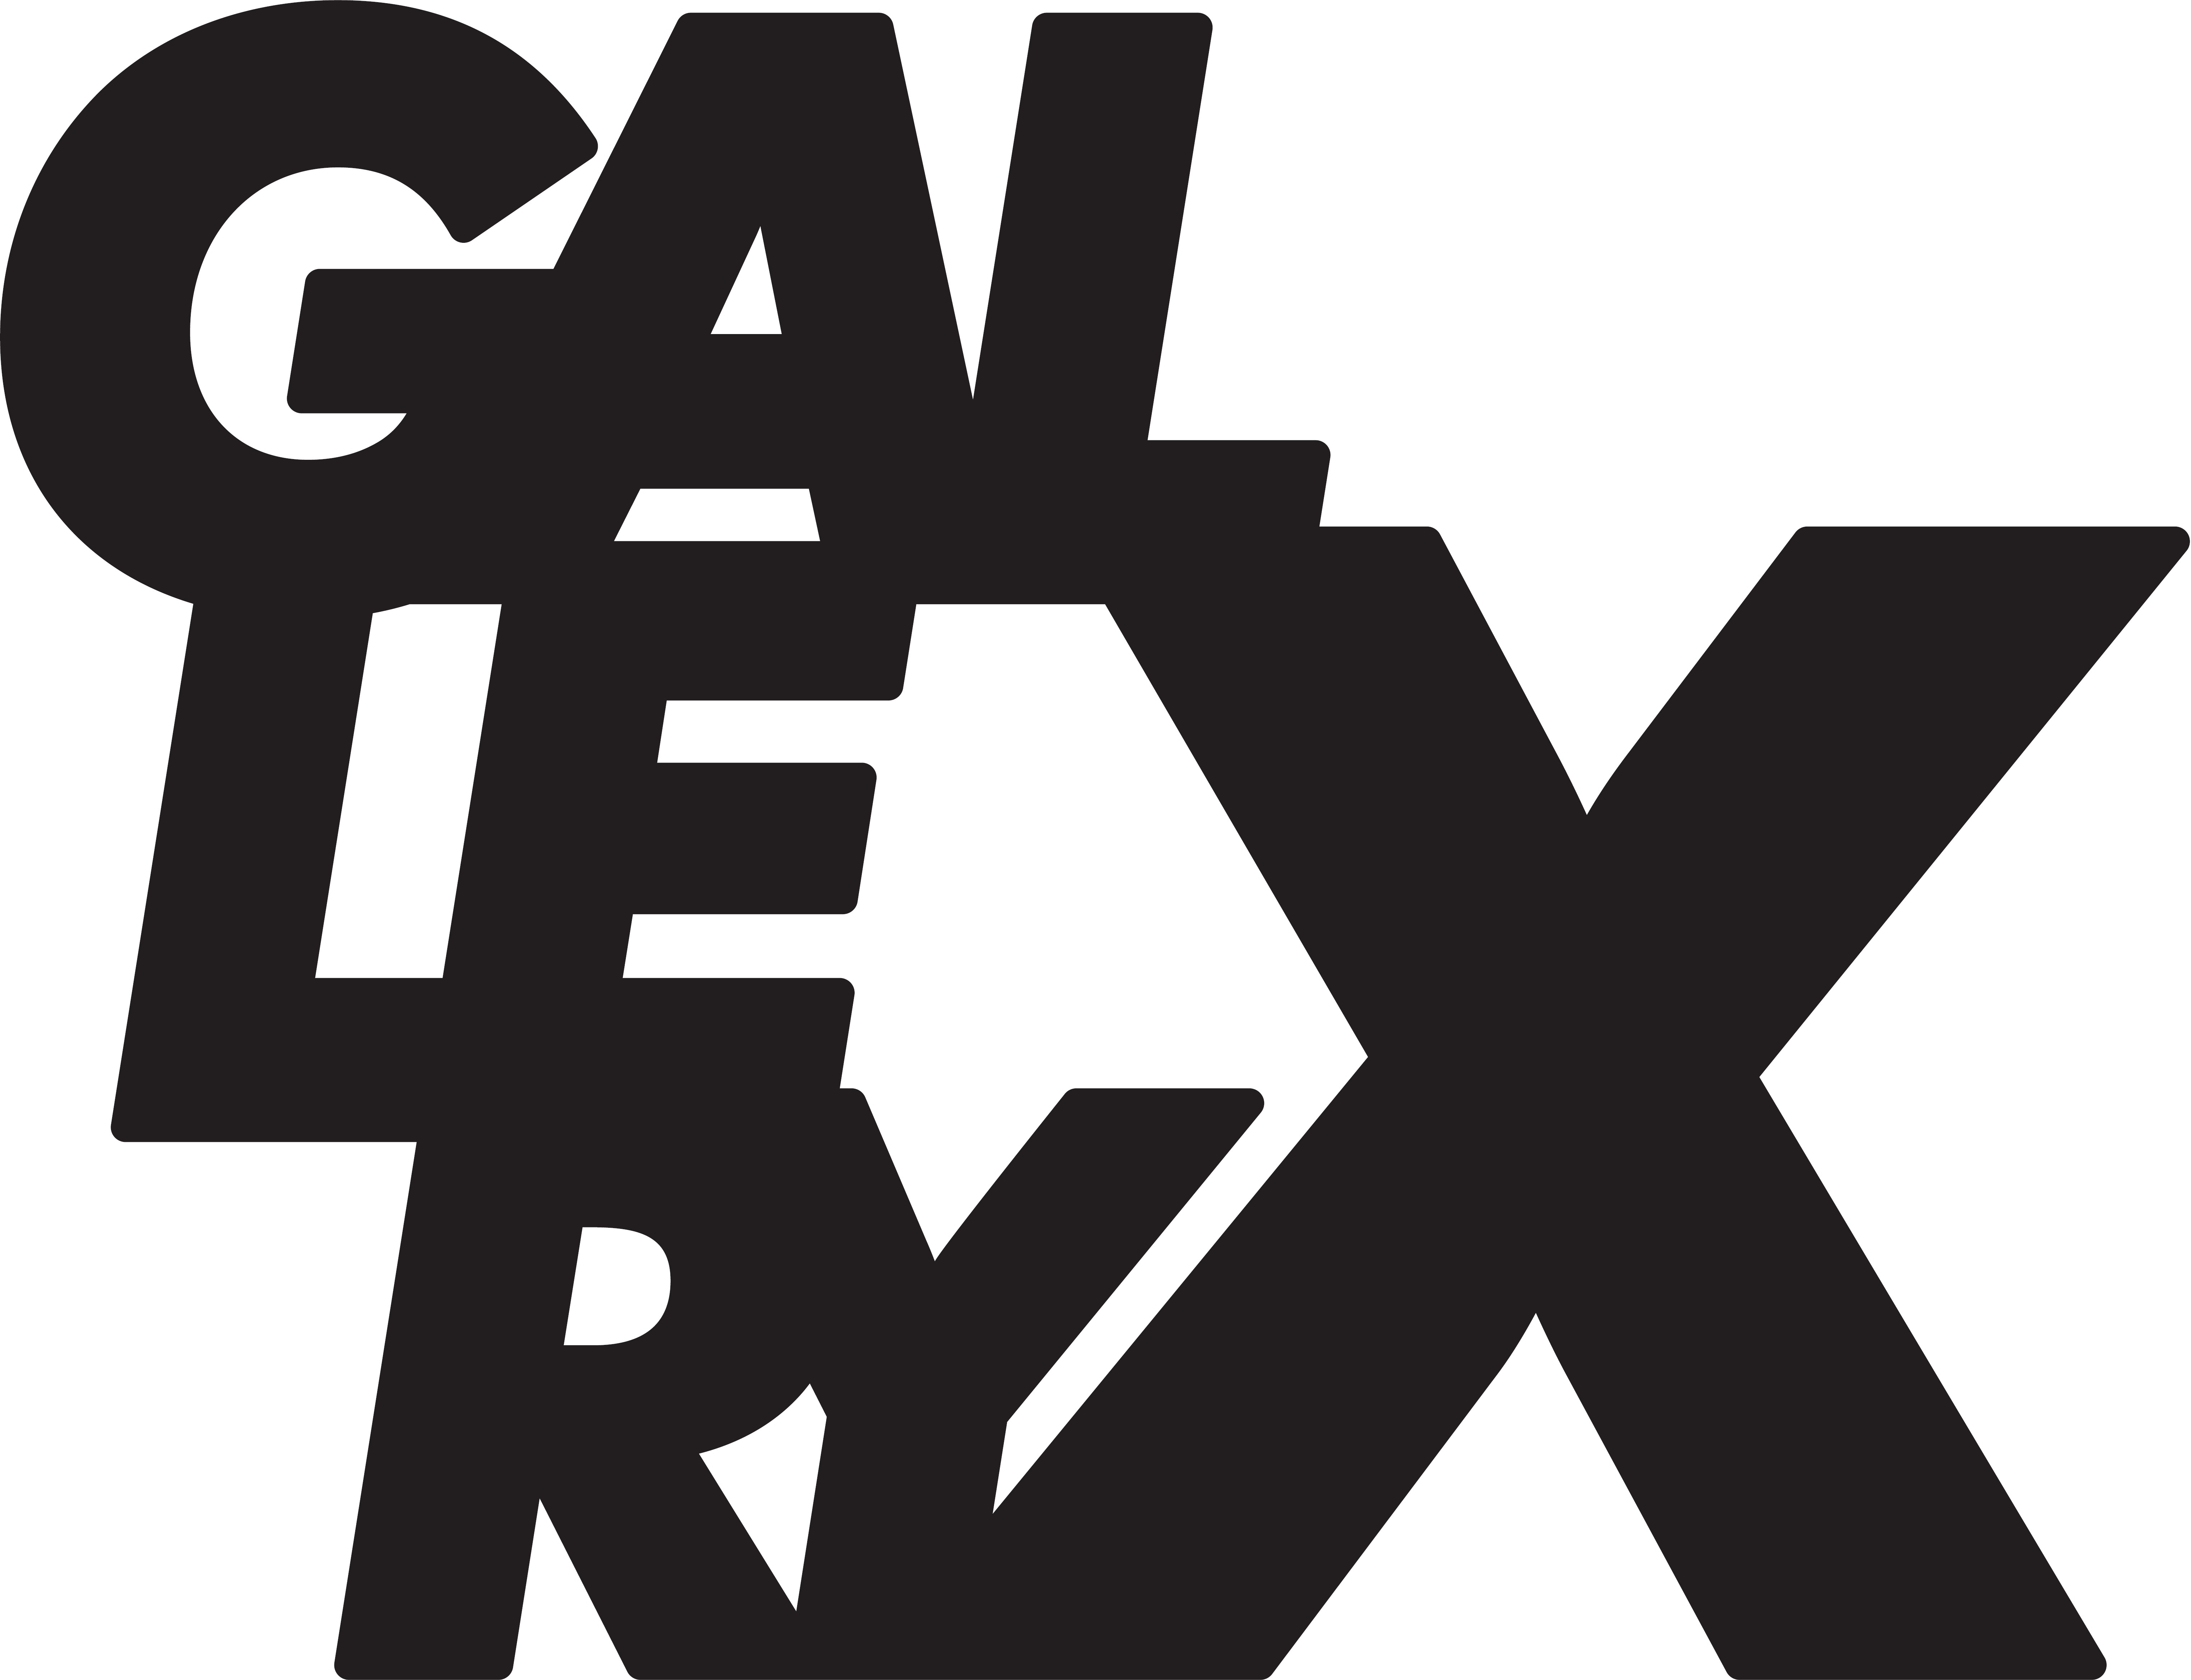 GALLERY X　BY PARCO